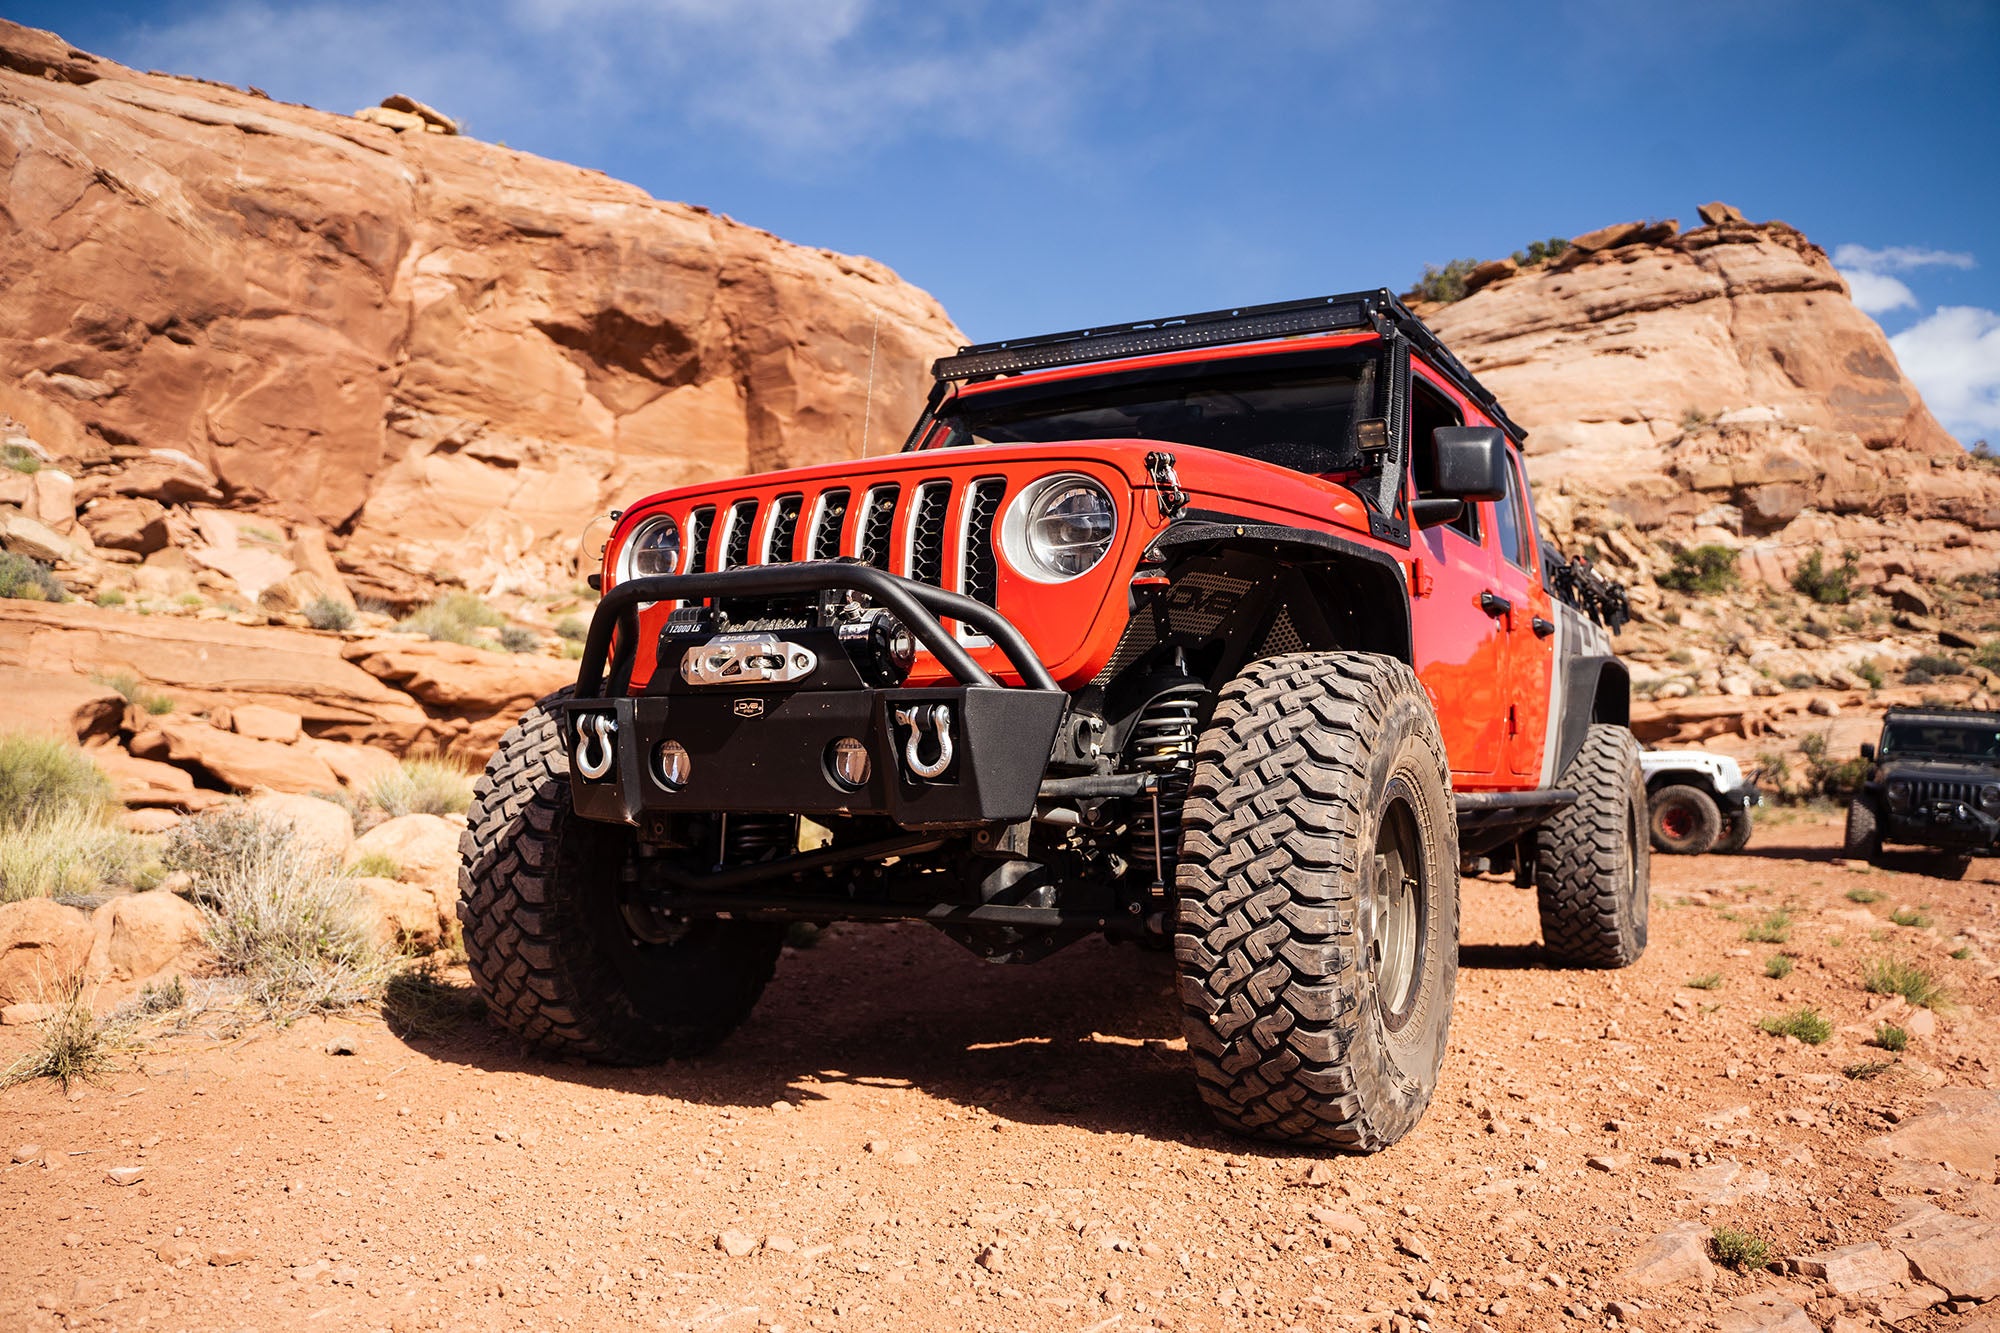 Front Bumper designed to fit the wrangler JK & JL, as well as the Gladiator JT